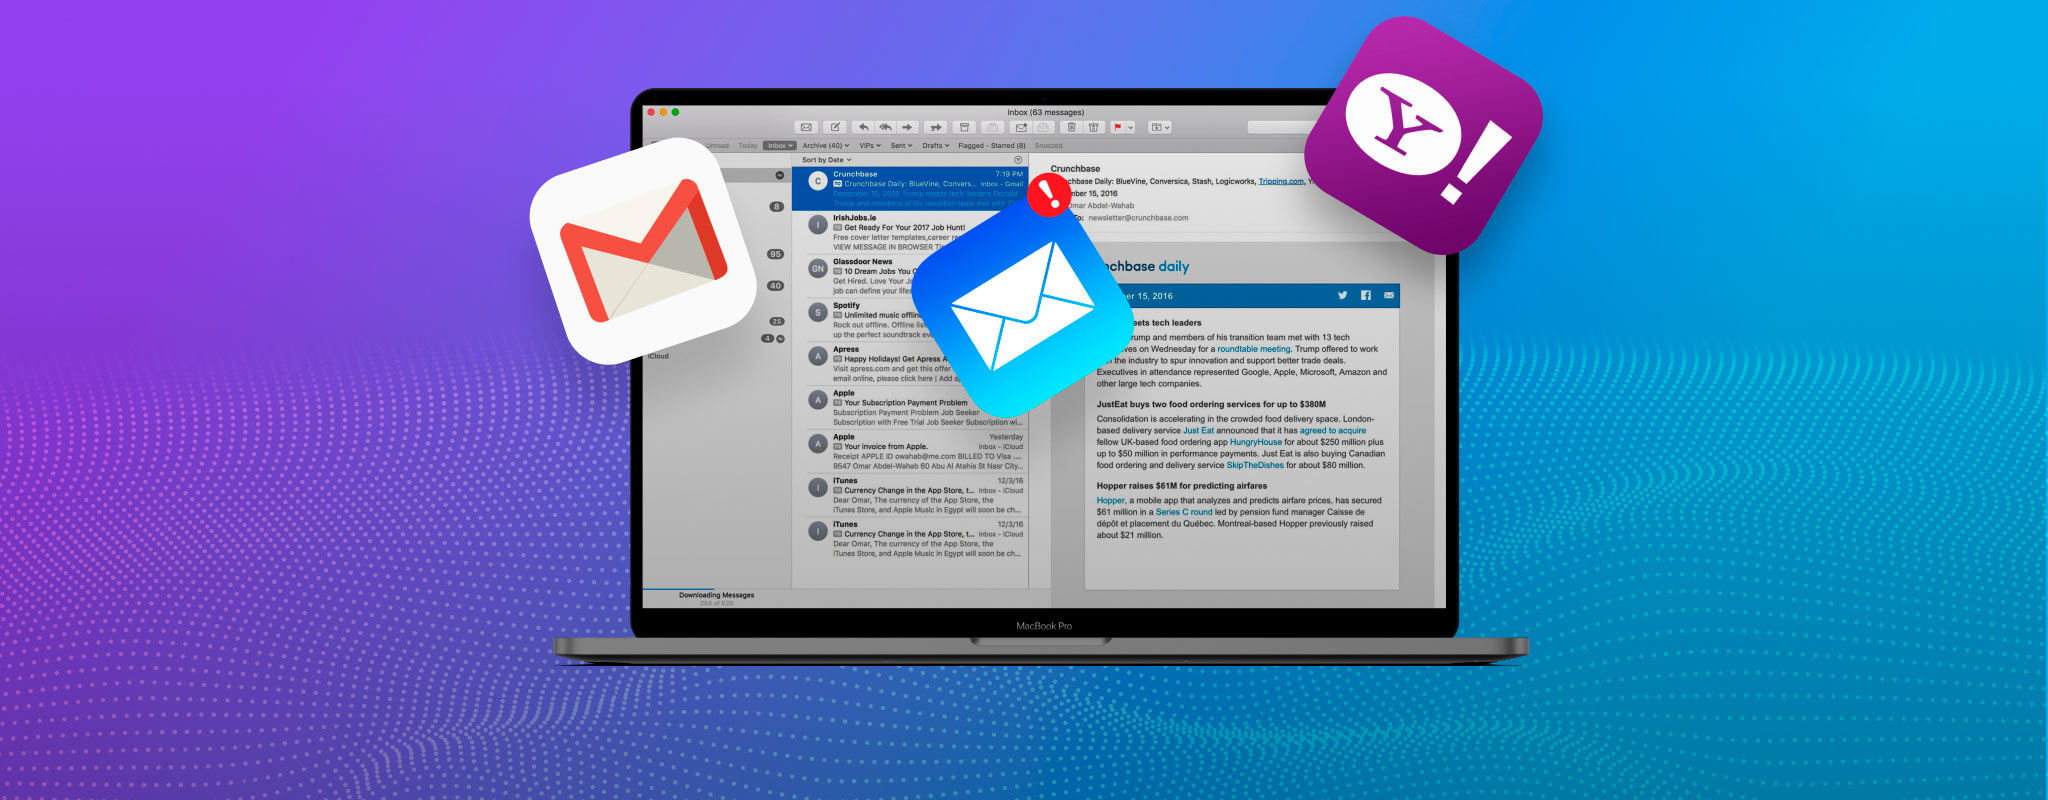 best email clients for mac 2016